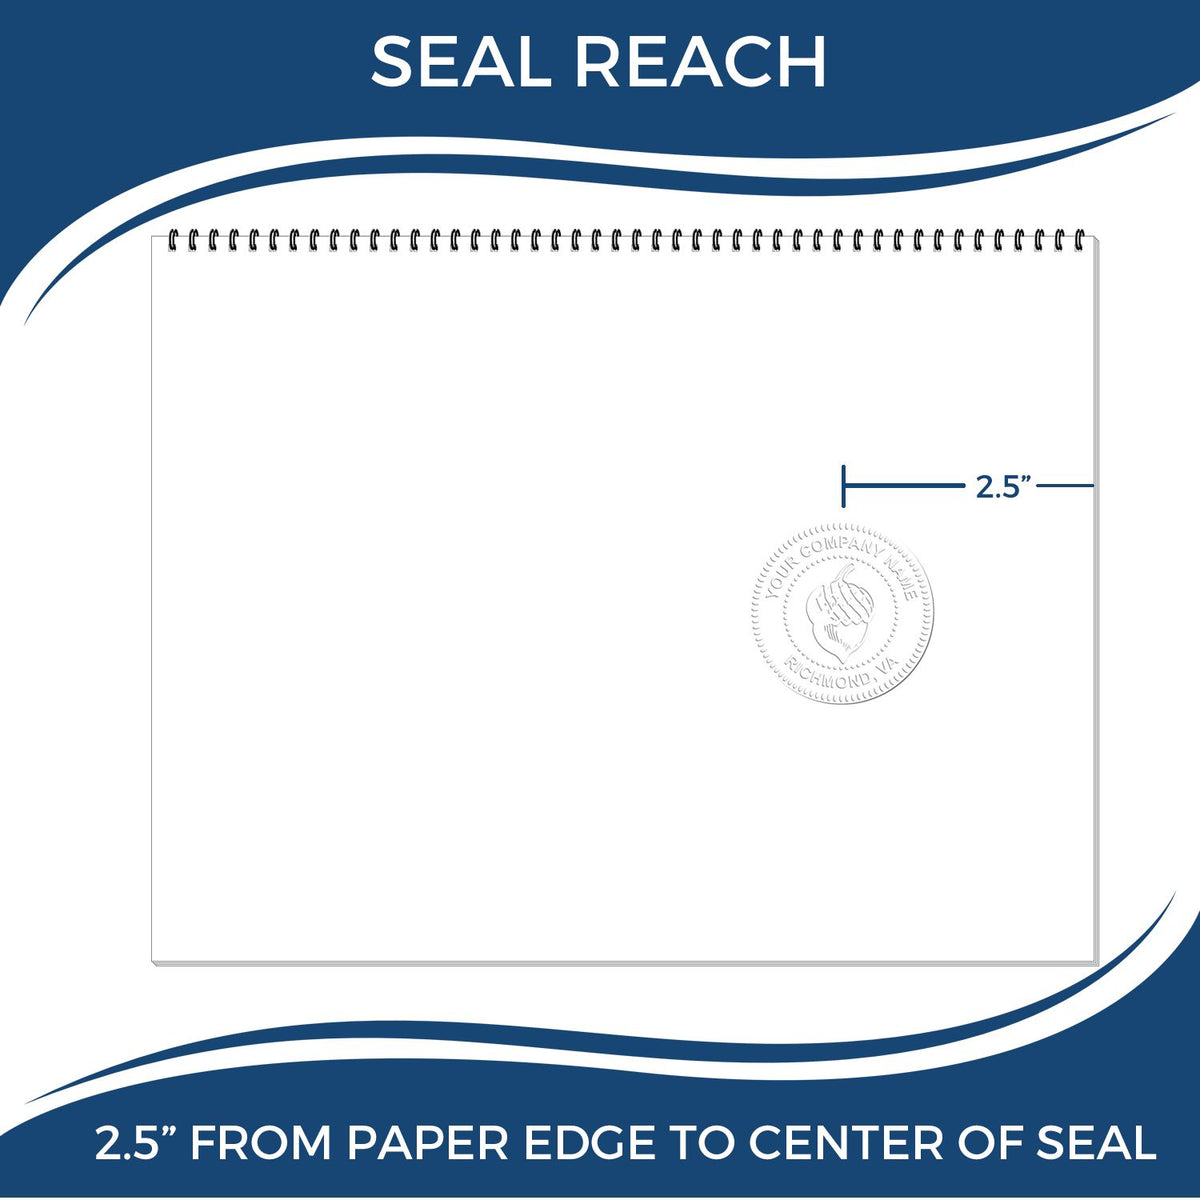 An infographic showing the seal reach which is represented by a ruler and a miniature seal image of the Heavy Duty Cast Iron Guam Architect Embosser